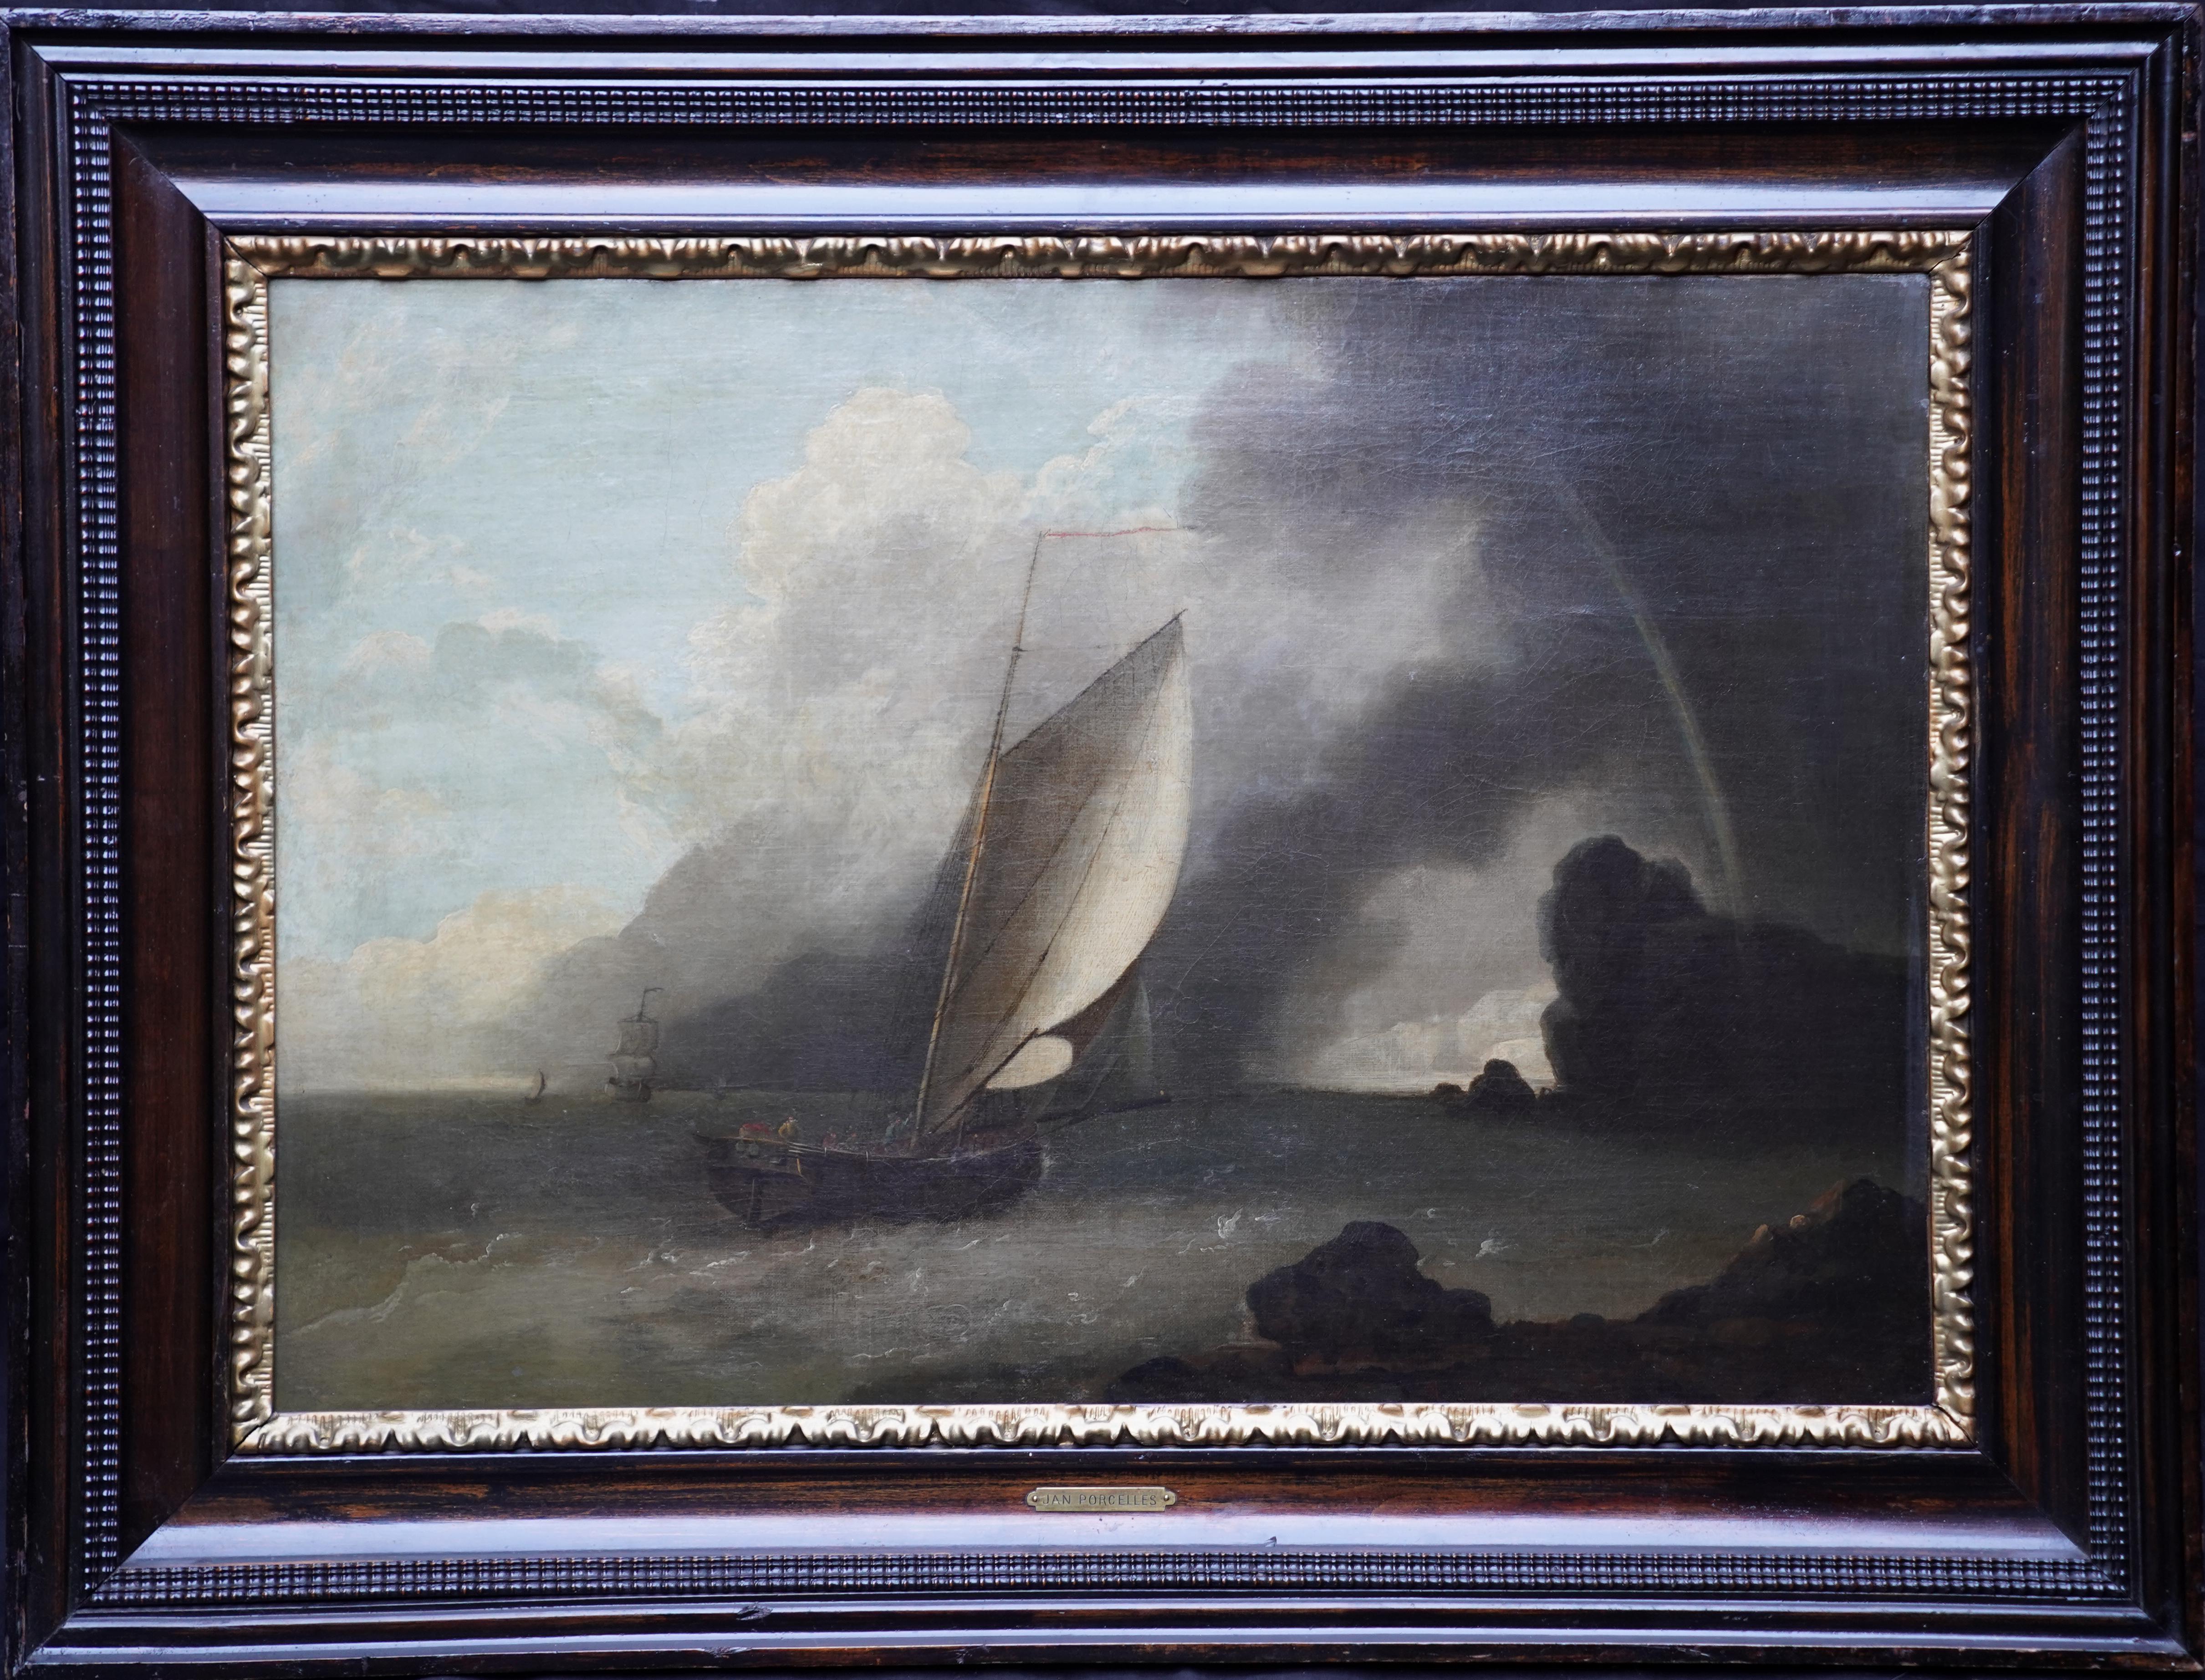 A Shipping Scene in Stormy Weather - Dutch 17th century art marine oil painting 6